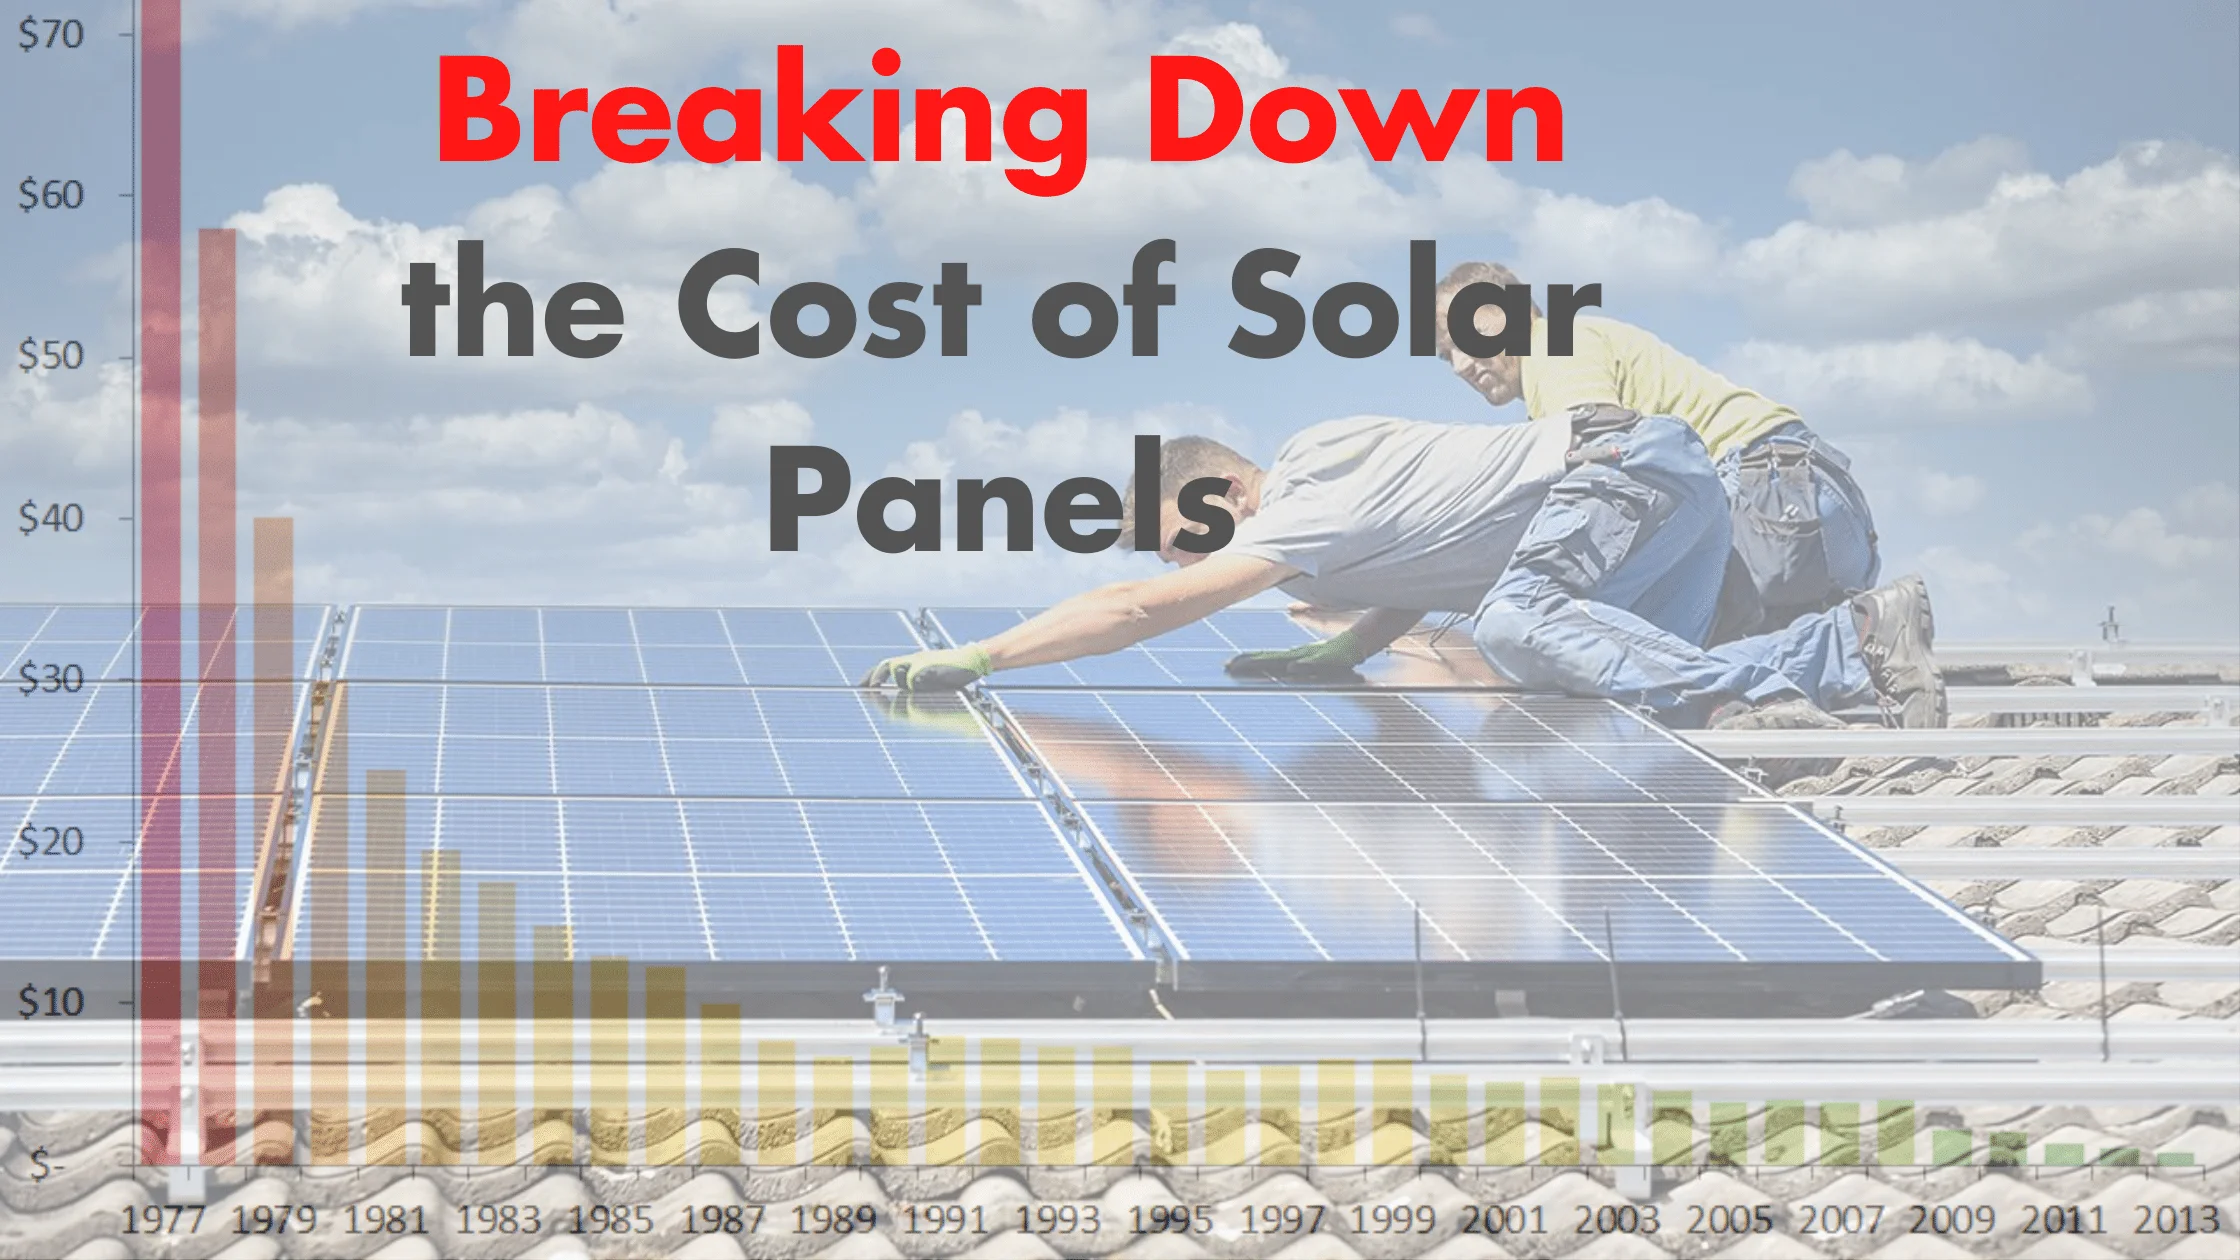 Breaking Down the Cost of Solar Panels